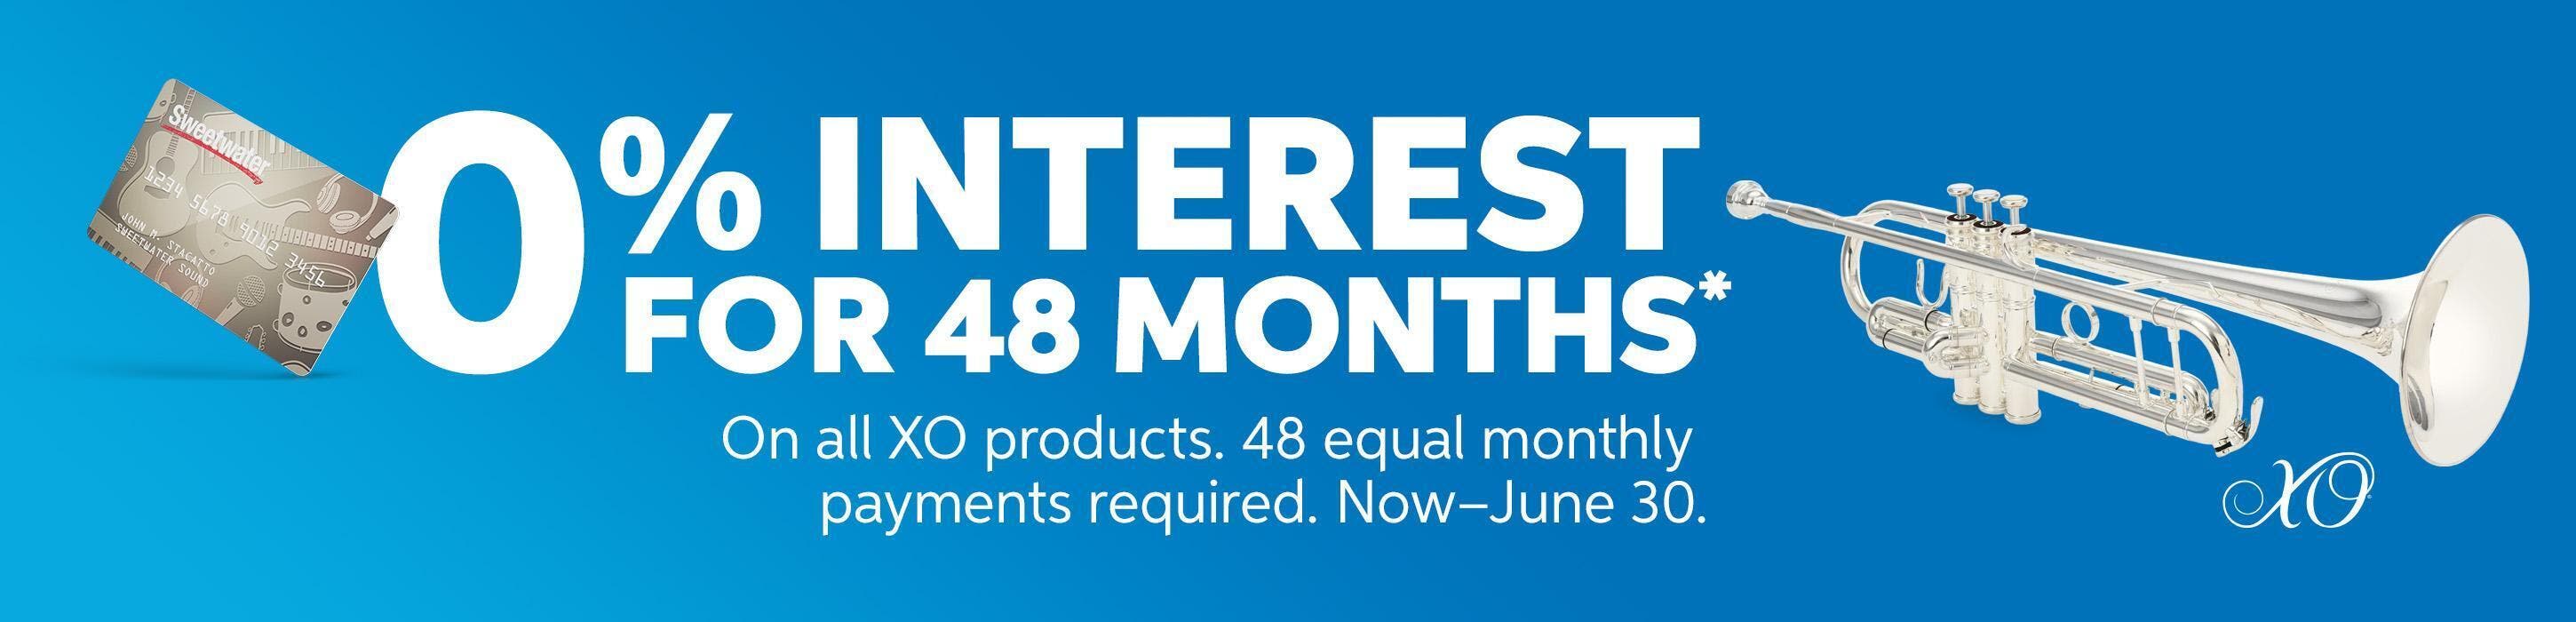 Get 0% Interest for 48 Months on XO products, Now thru 6/30